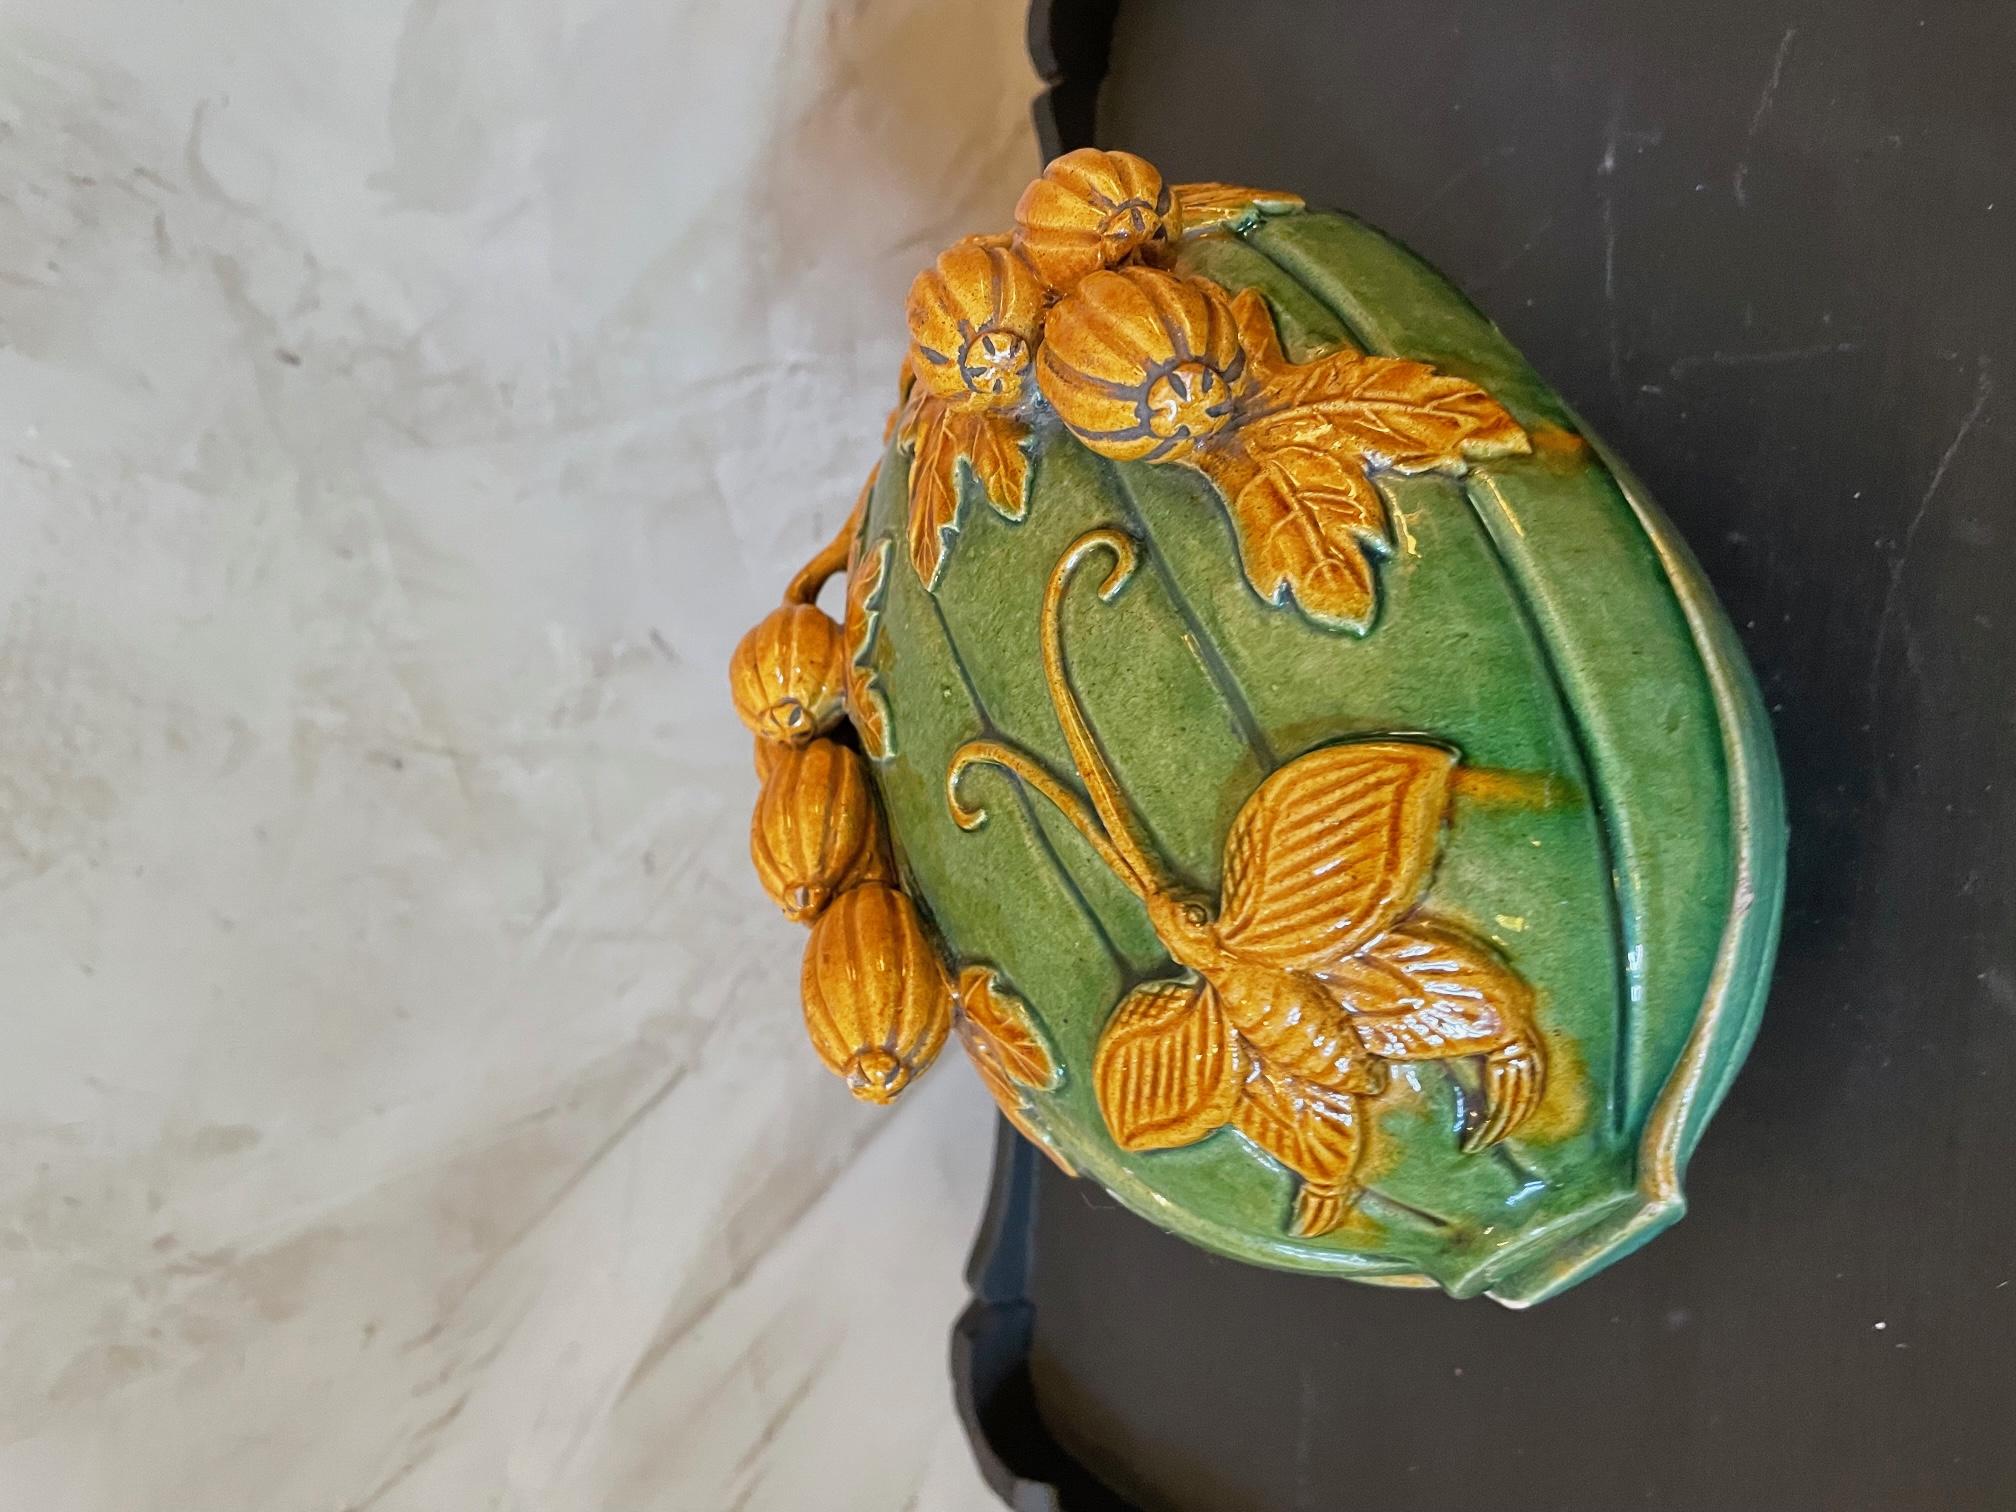 Very nice 20th century Chinese decorative boxe representing a nut with a Butterly, leaves and fruits on it. 
Good quality and condition. 
Rare item.